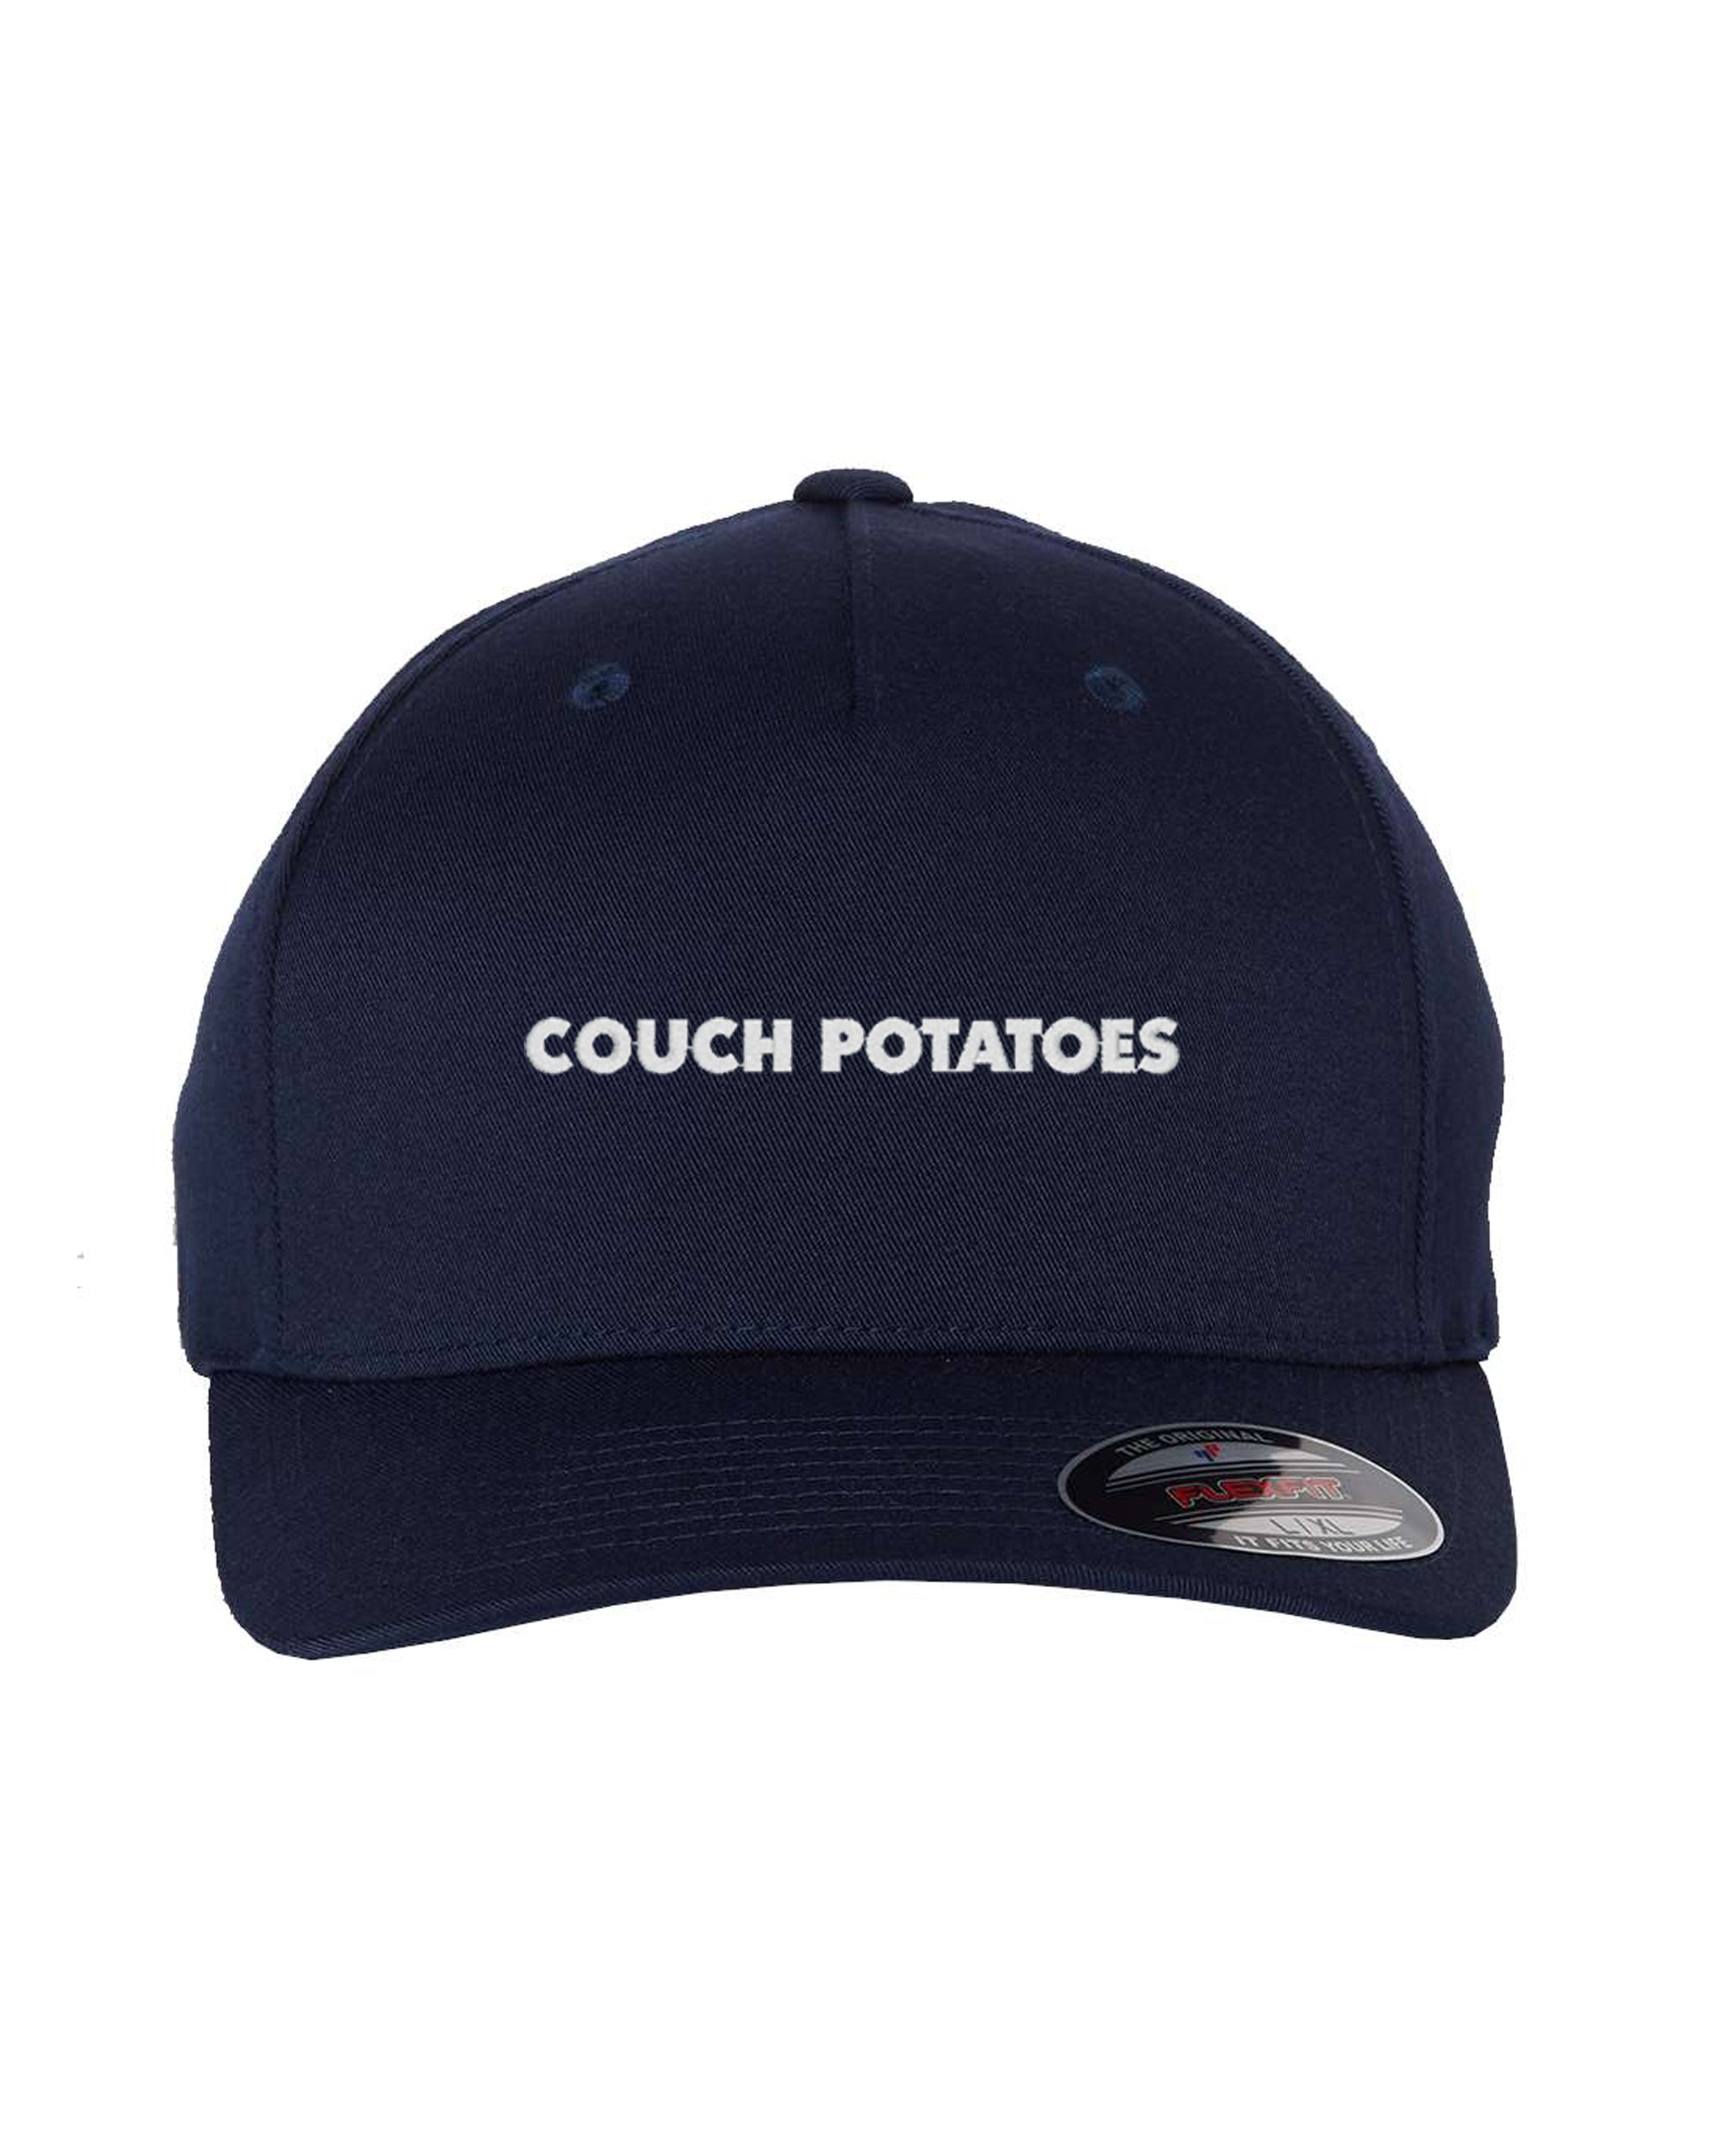 Couch Potatoes - Flexfit Adult 5-Panel Poly-Twill Cap - 6560